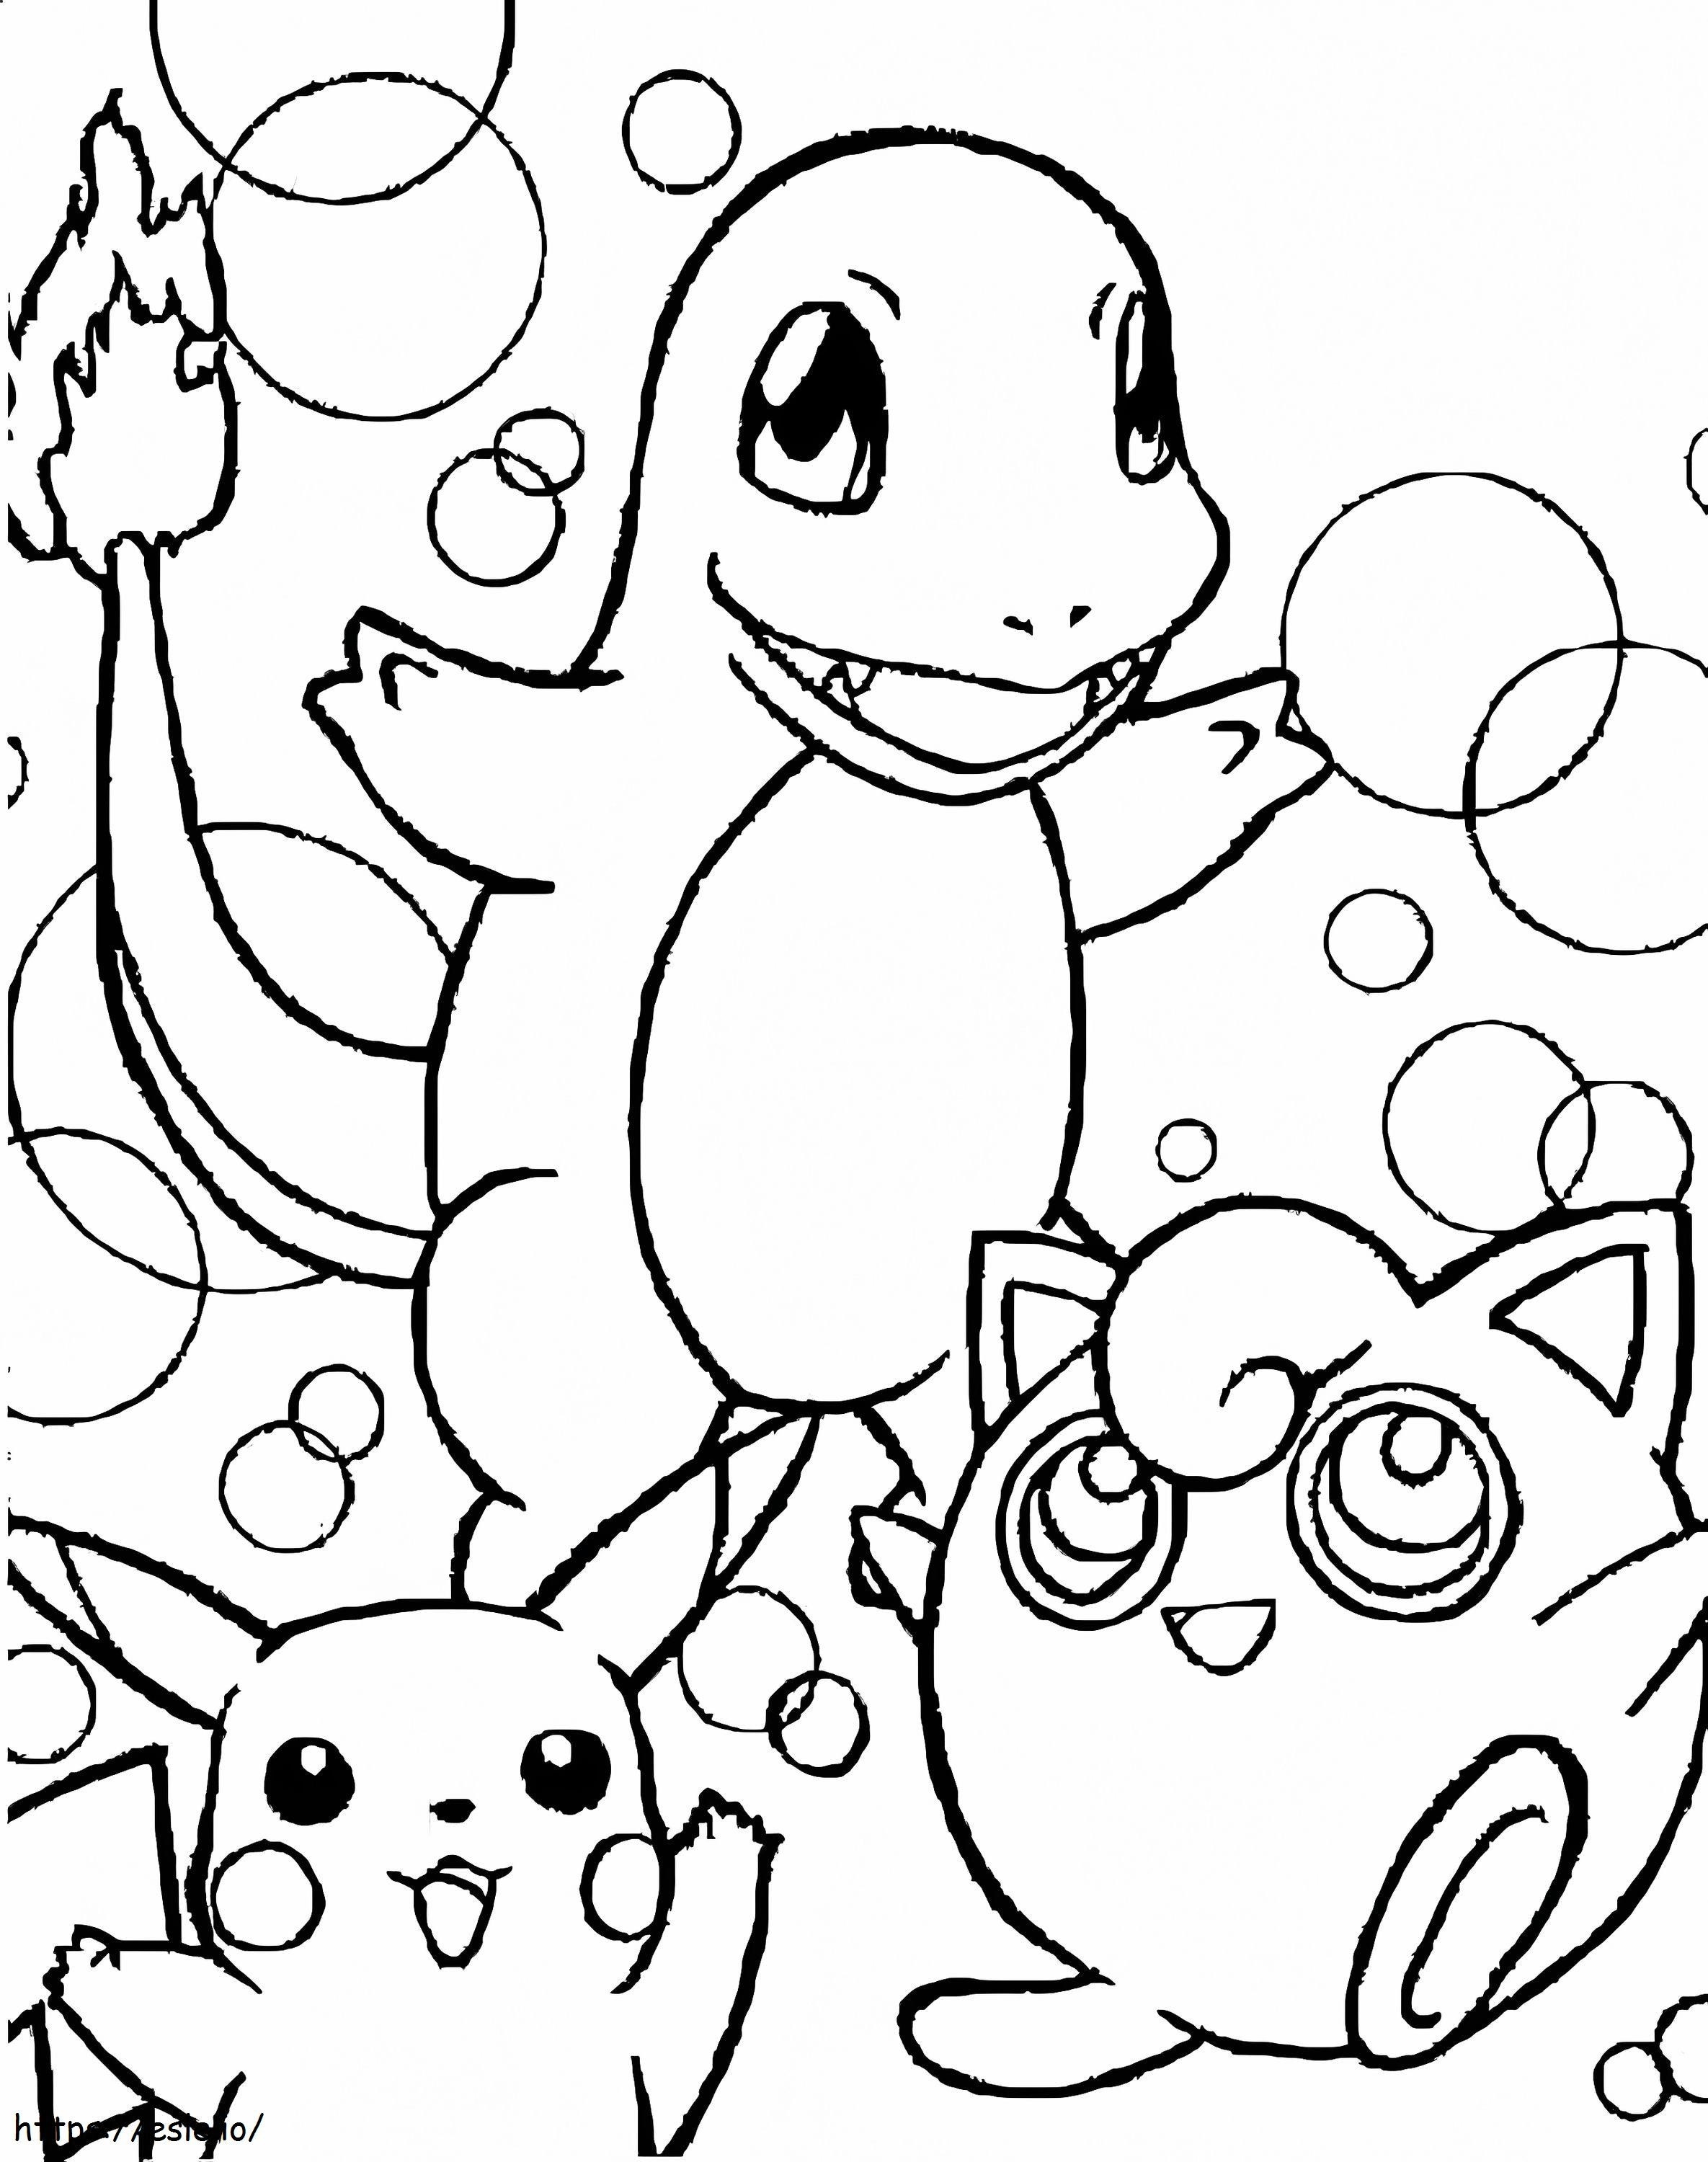 Pikachu And Charmander coloring page